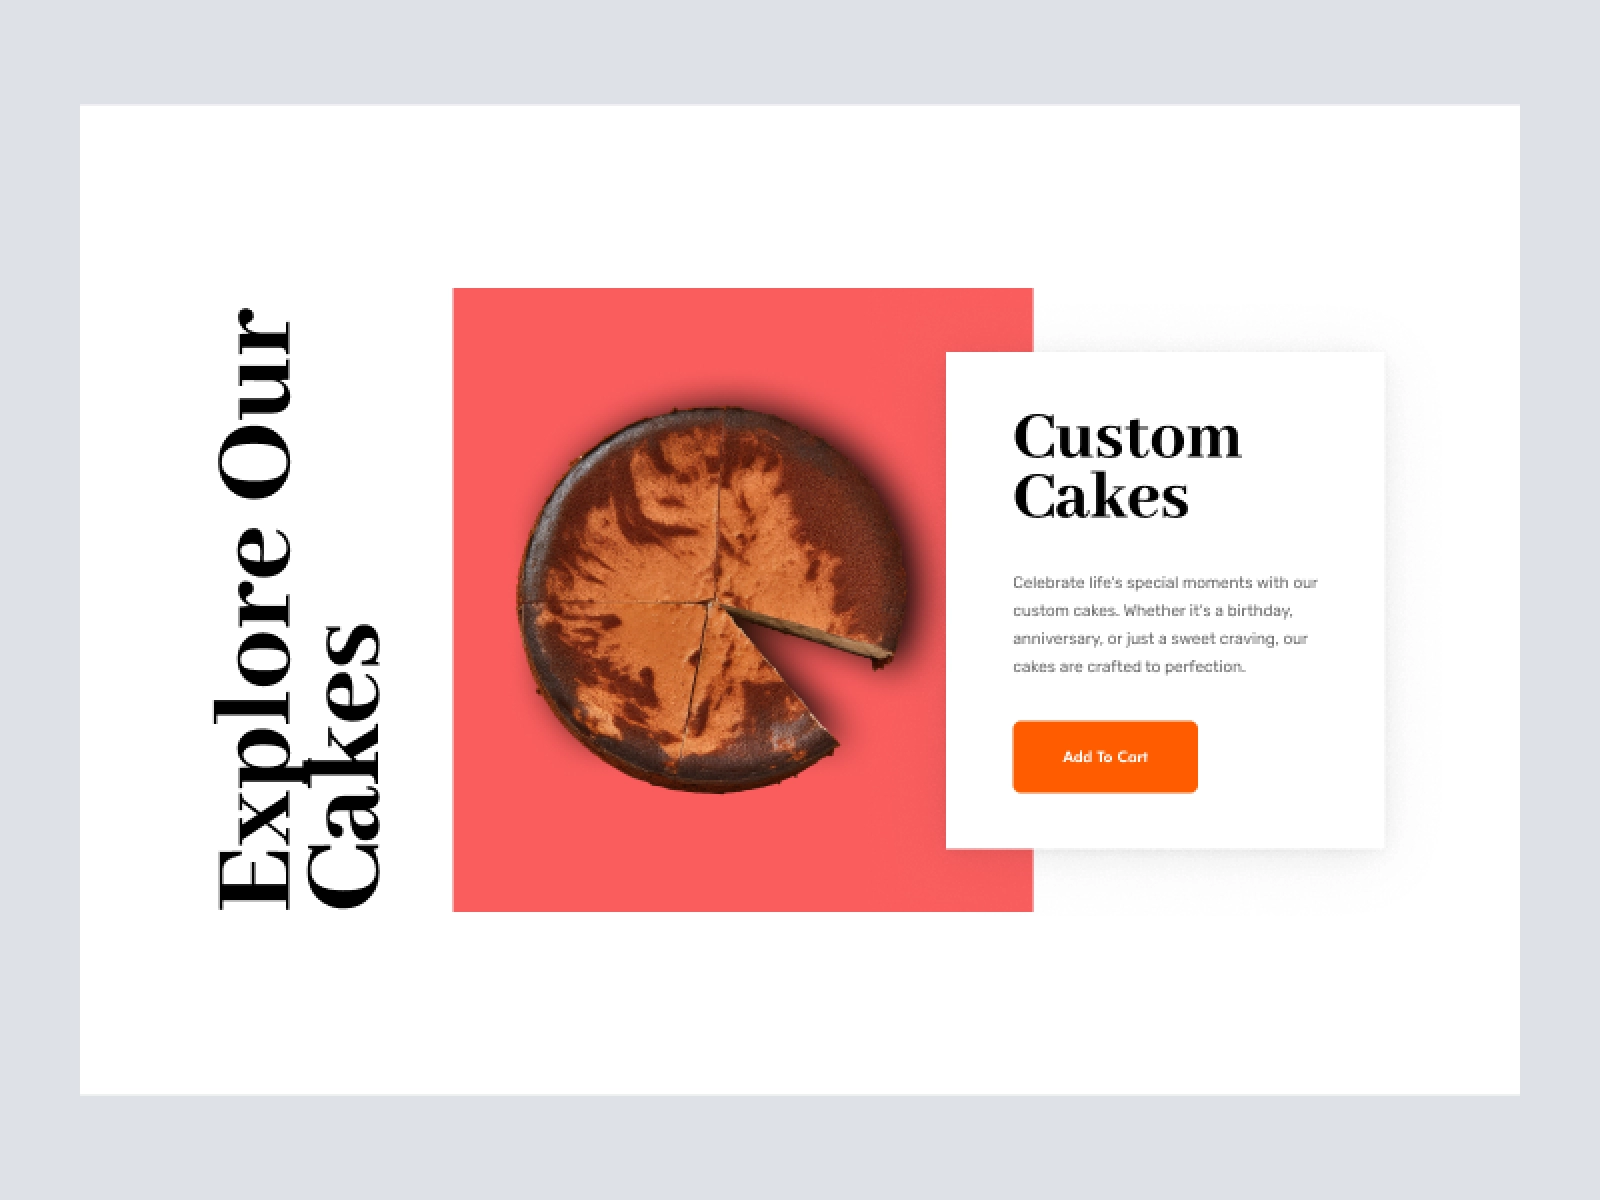 Bakery Shopify Store Design for Adobe XD - screen 4